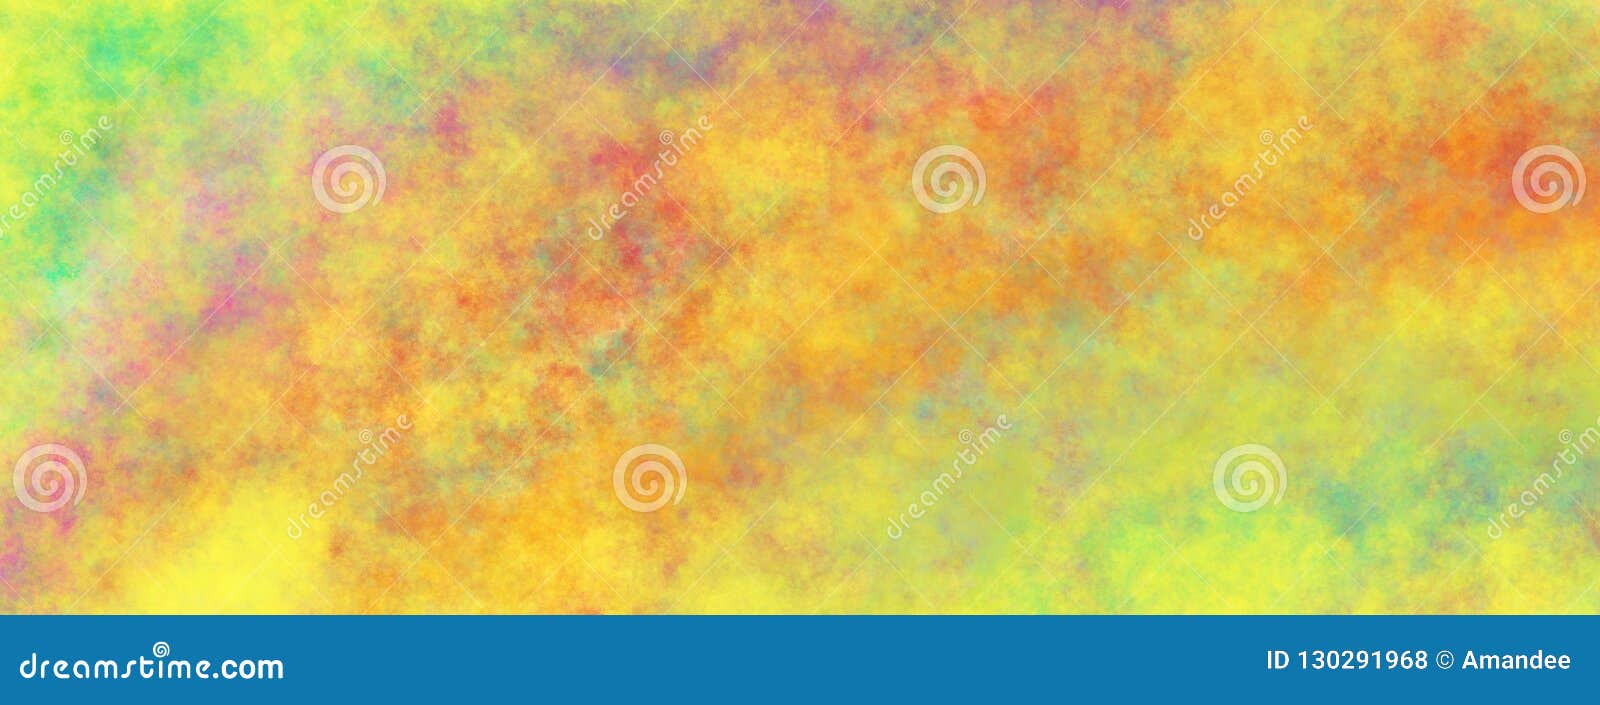 abstract painted background  with cloudy texture in blotchy pattern of yellow blue orange red purple gold and green